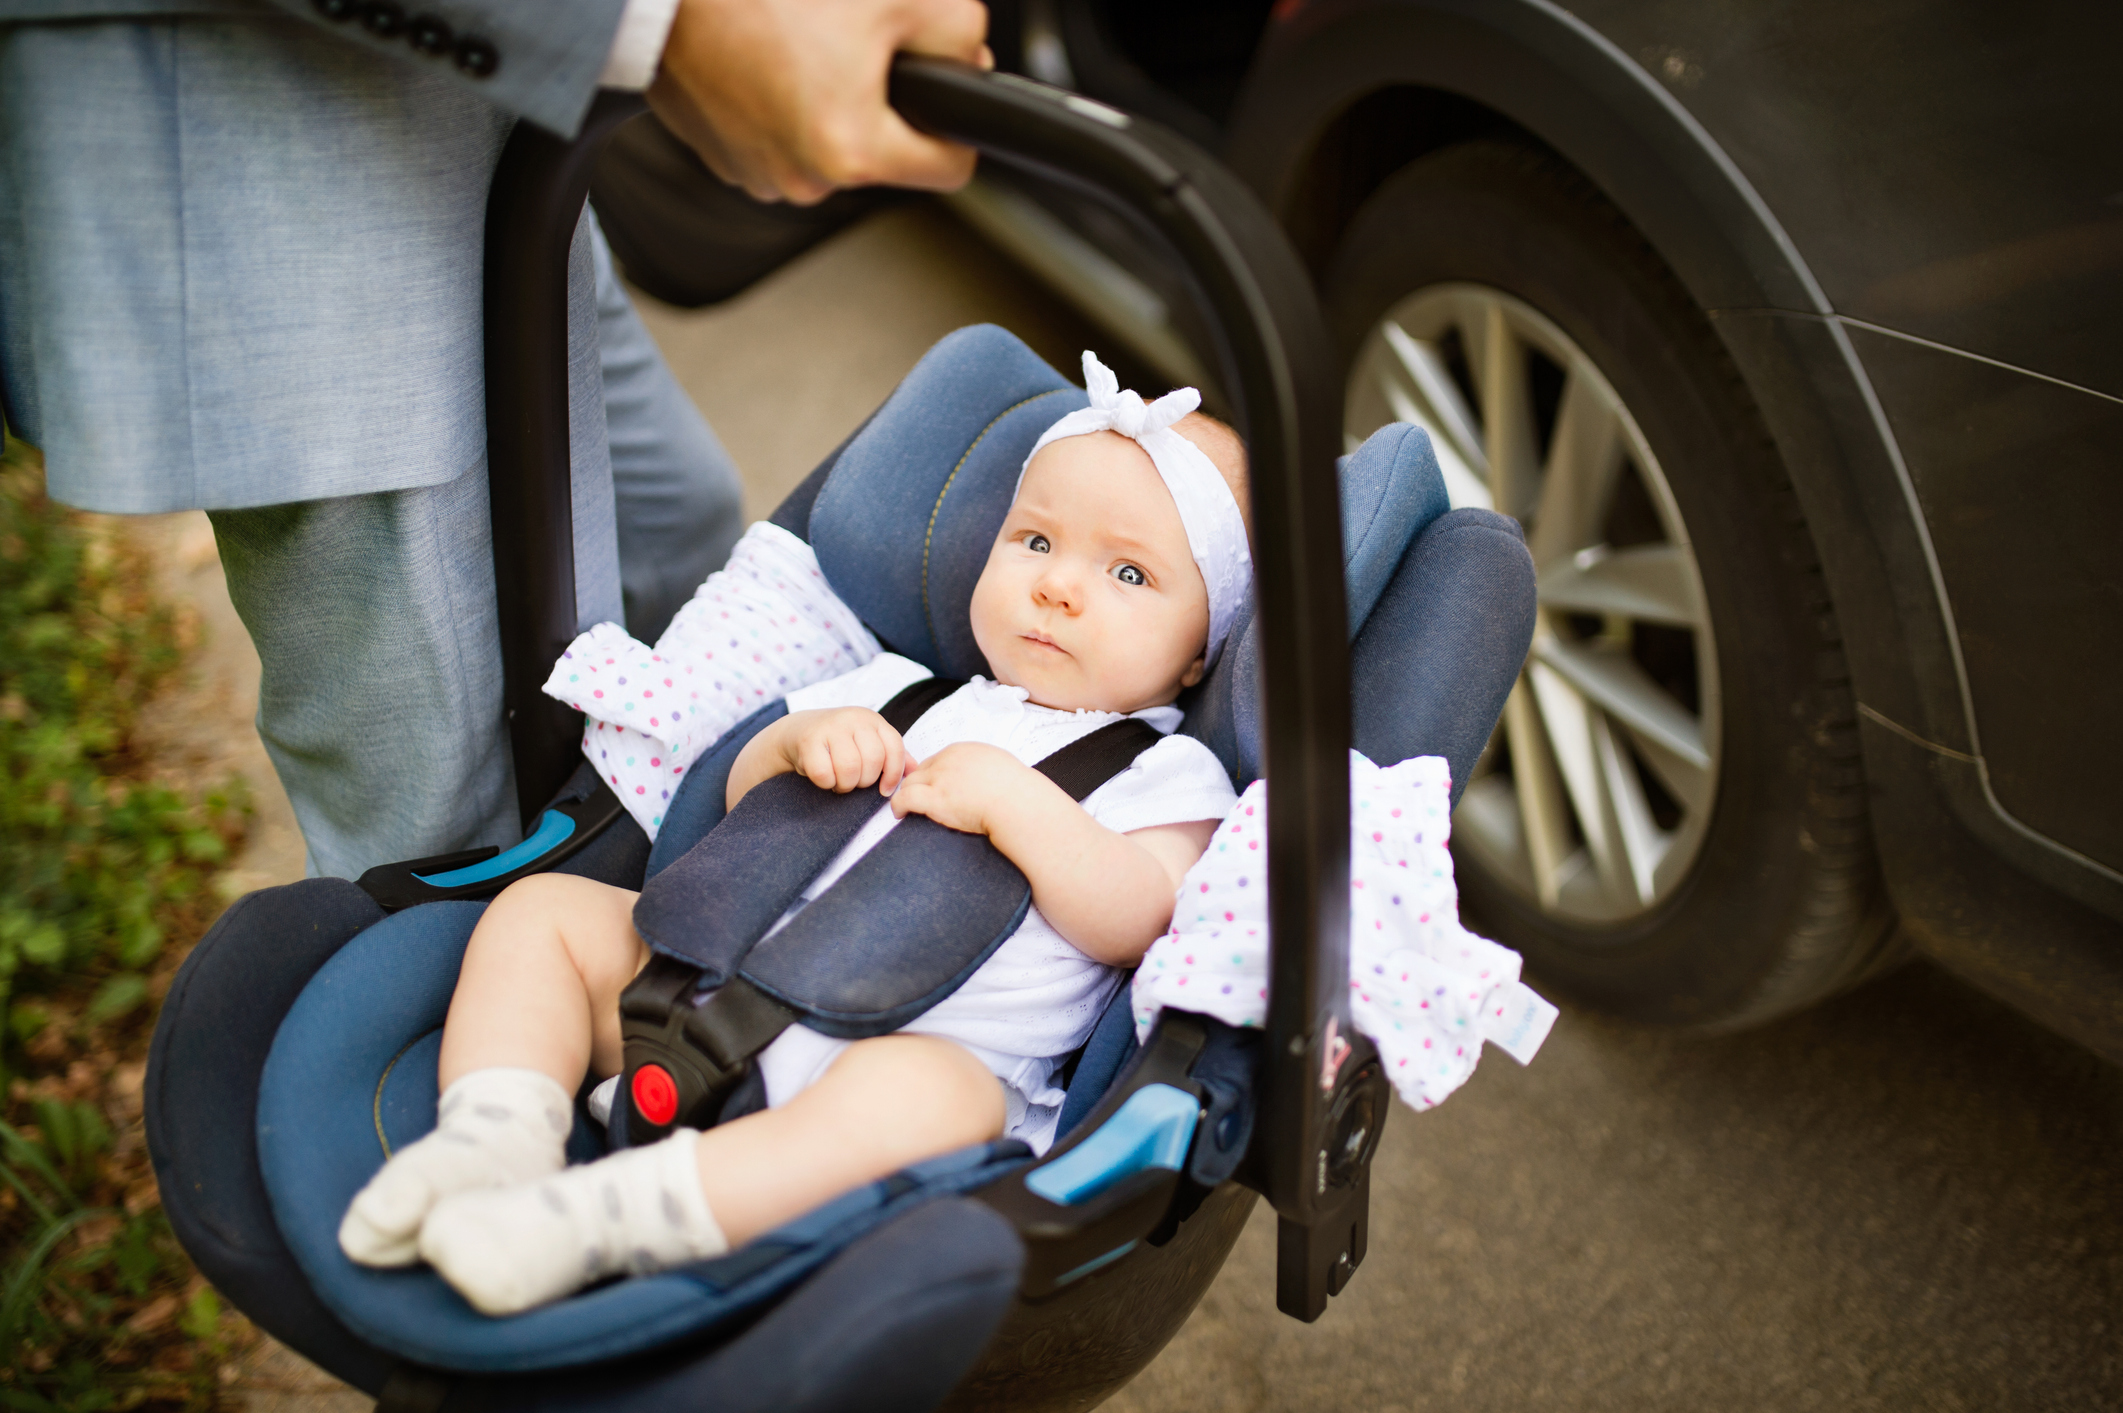 Fitting a baby's car seat  Baby & toddler, Getting out & about